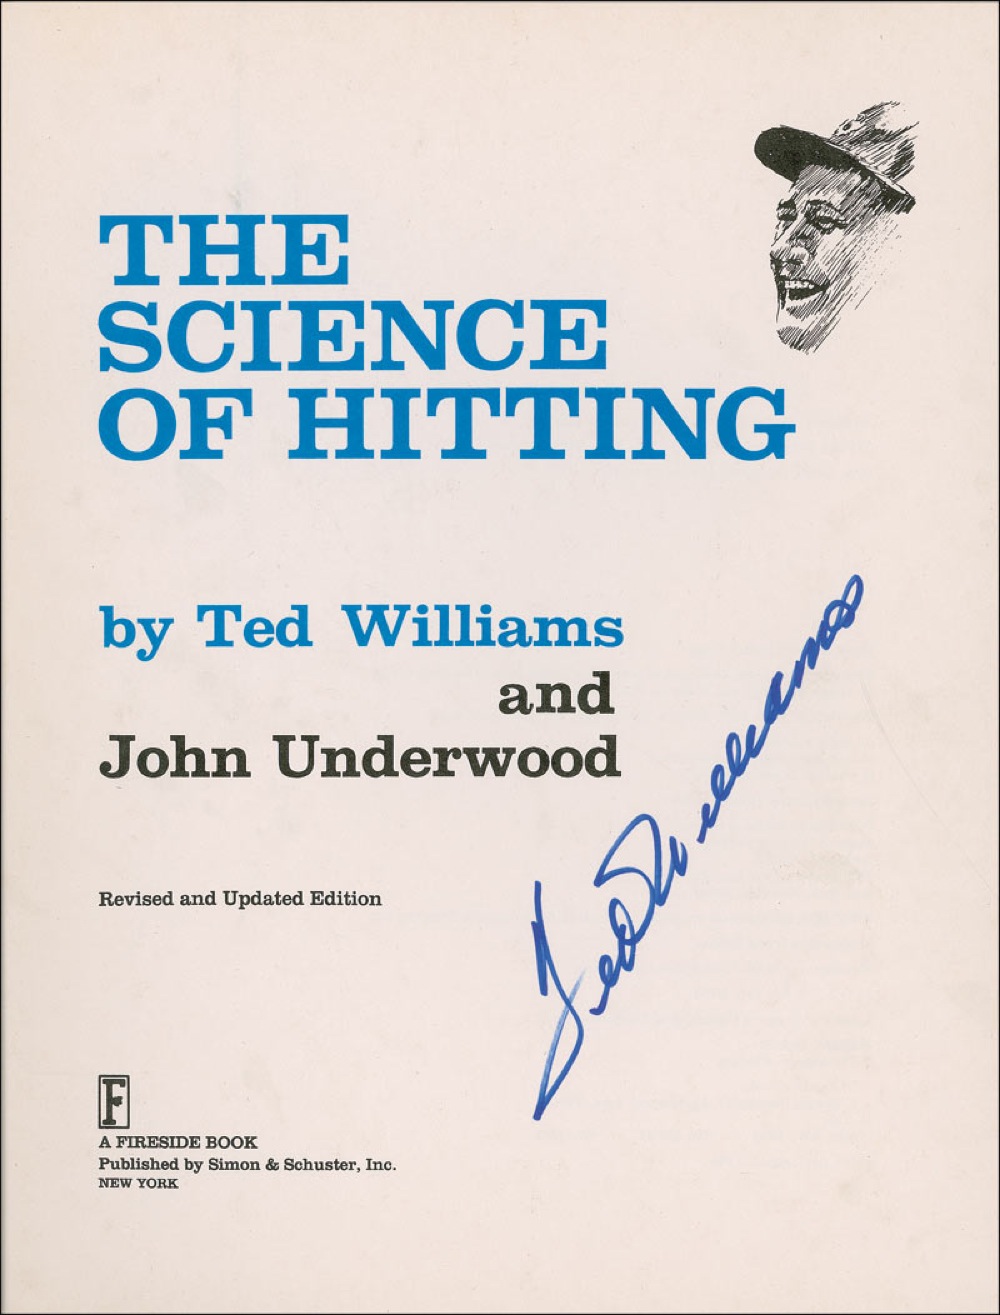 Lot #1568 Ted Williams